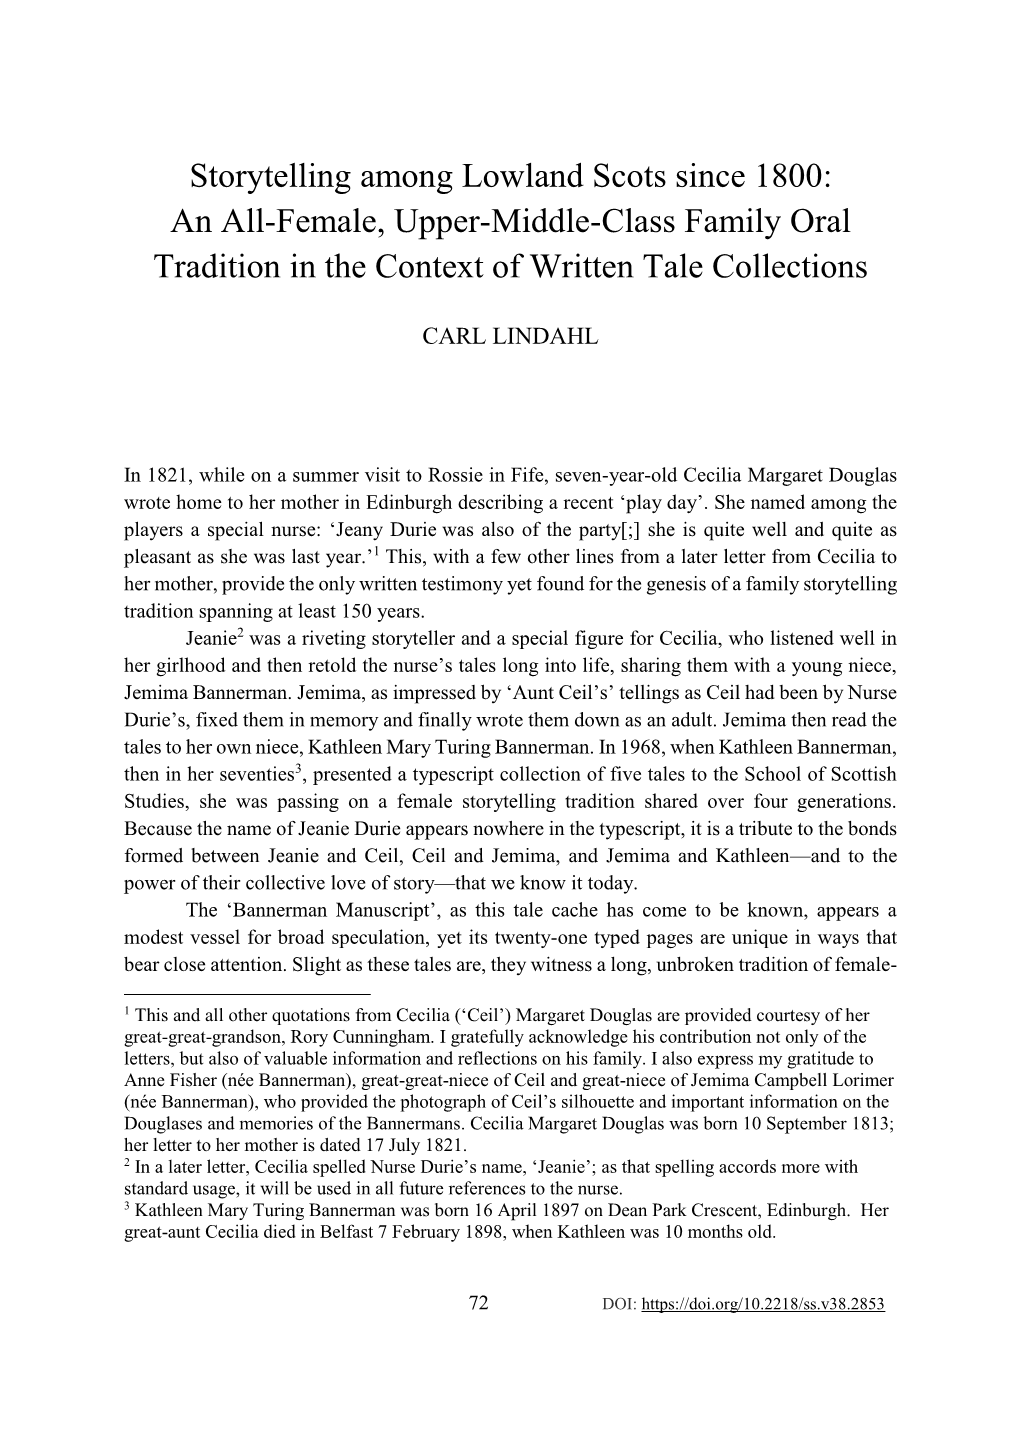 Storytelling Among Lowland Scots Since 1800: an All-Female, Upper-Middle-Class Family Oral Tradition in the Context of Written Tale Collections